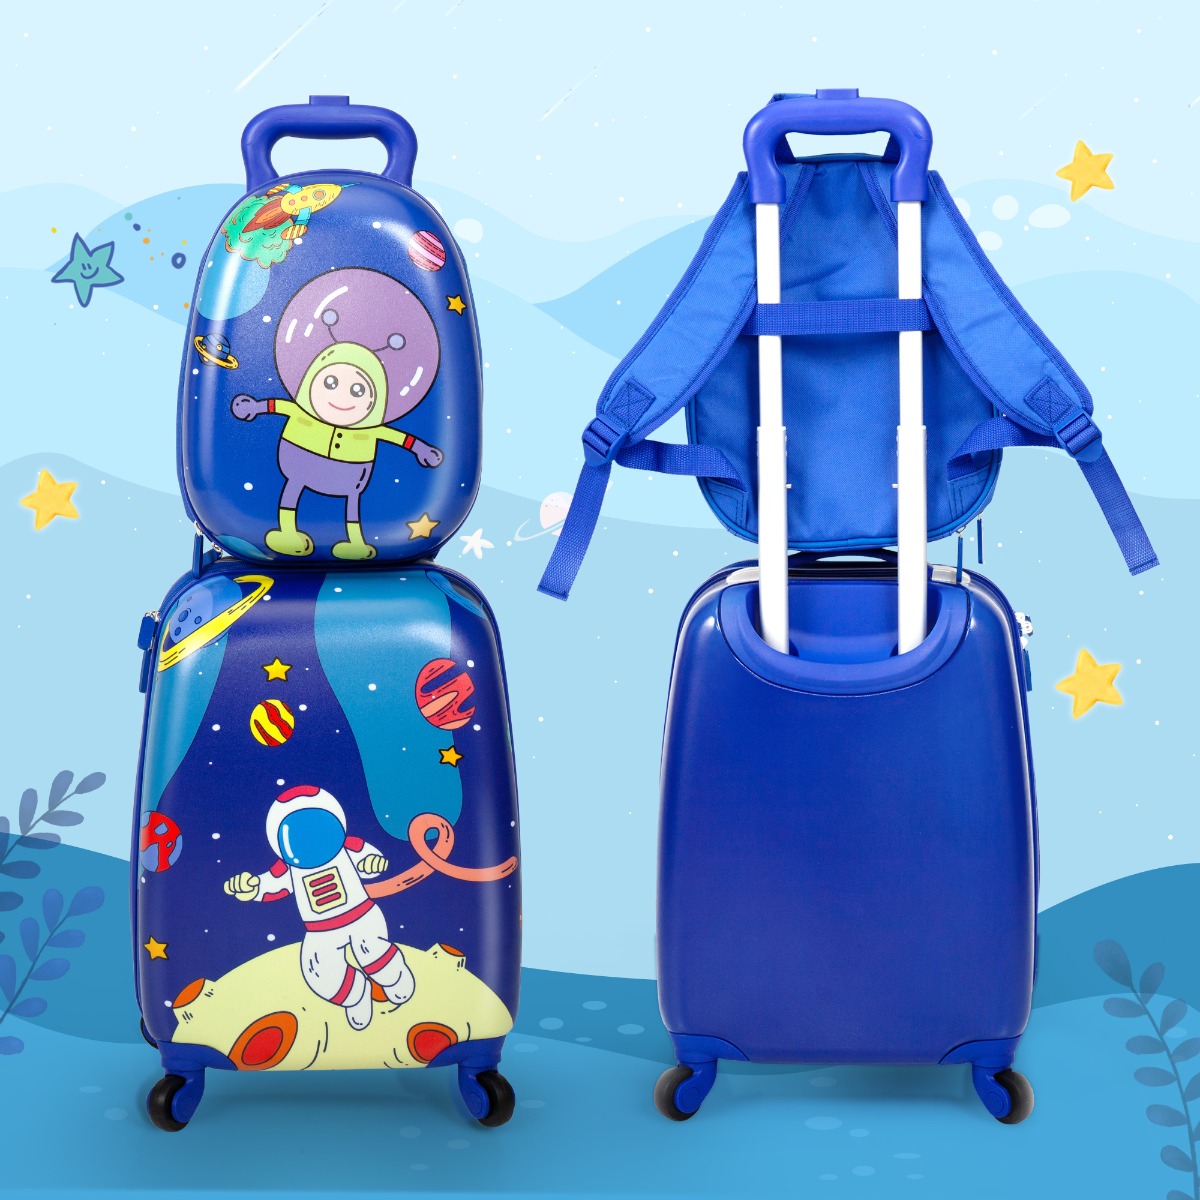 Amazon.com | KIDDIETOTES 3-D Hardshell Ride On Suitcase Scooter for Kids  -Cute Lightweight Kids Luggage with Wheels - Fun LED Lights | Kids' Luggage